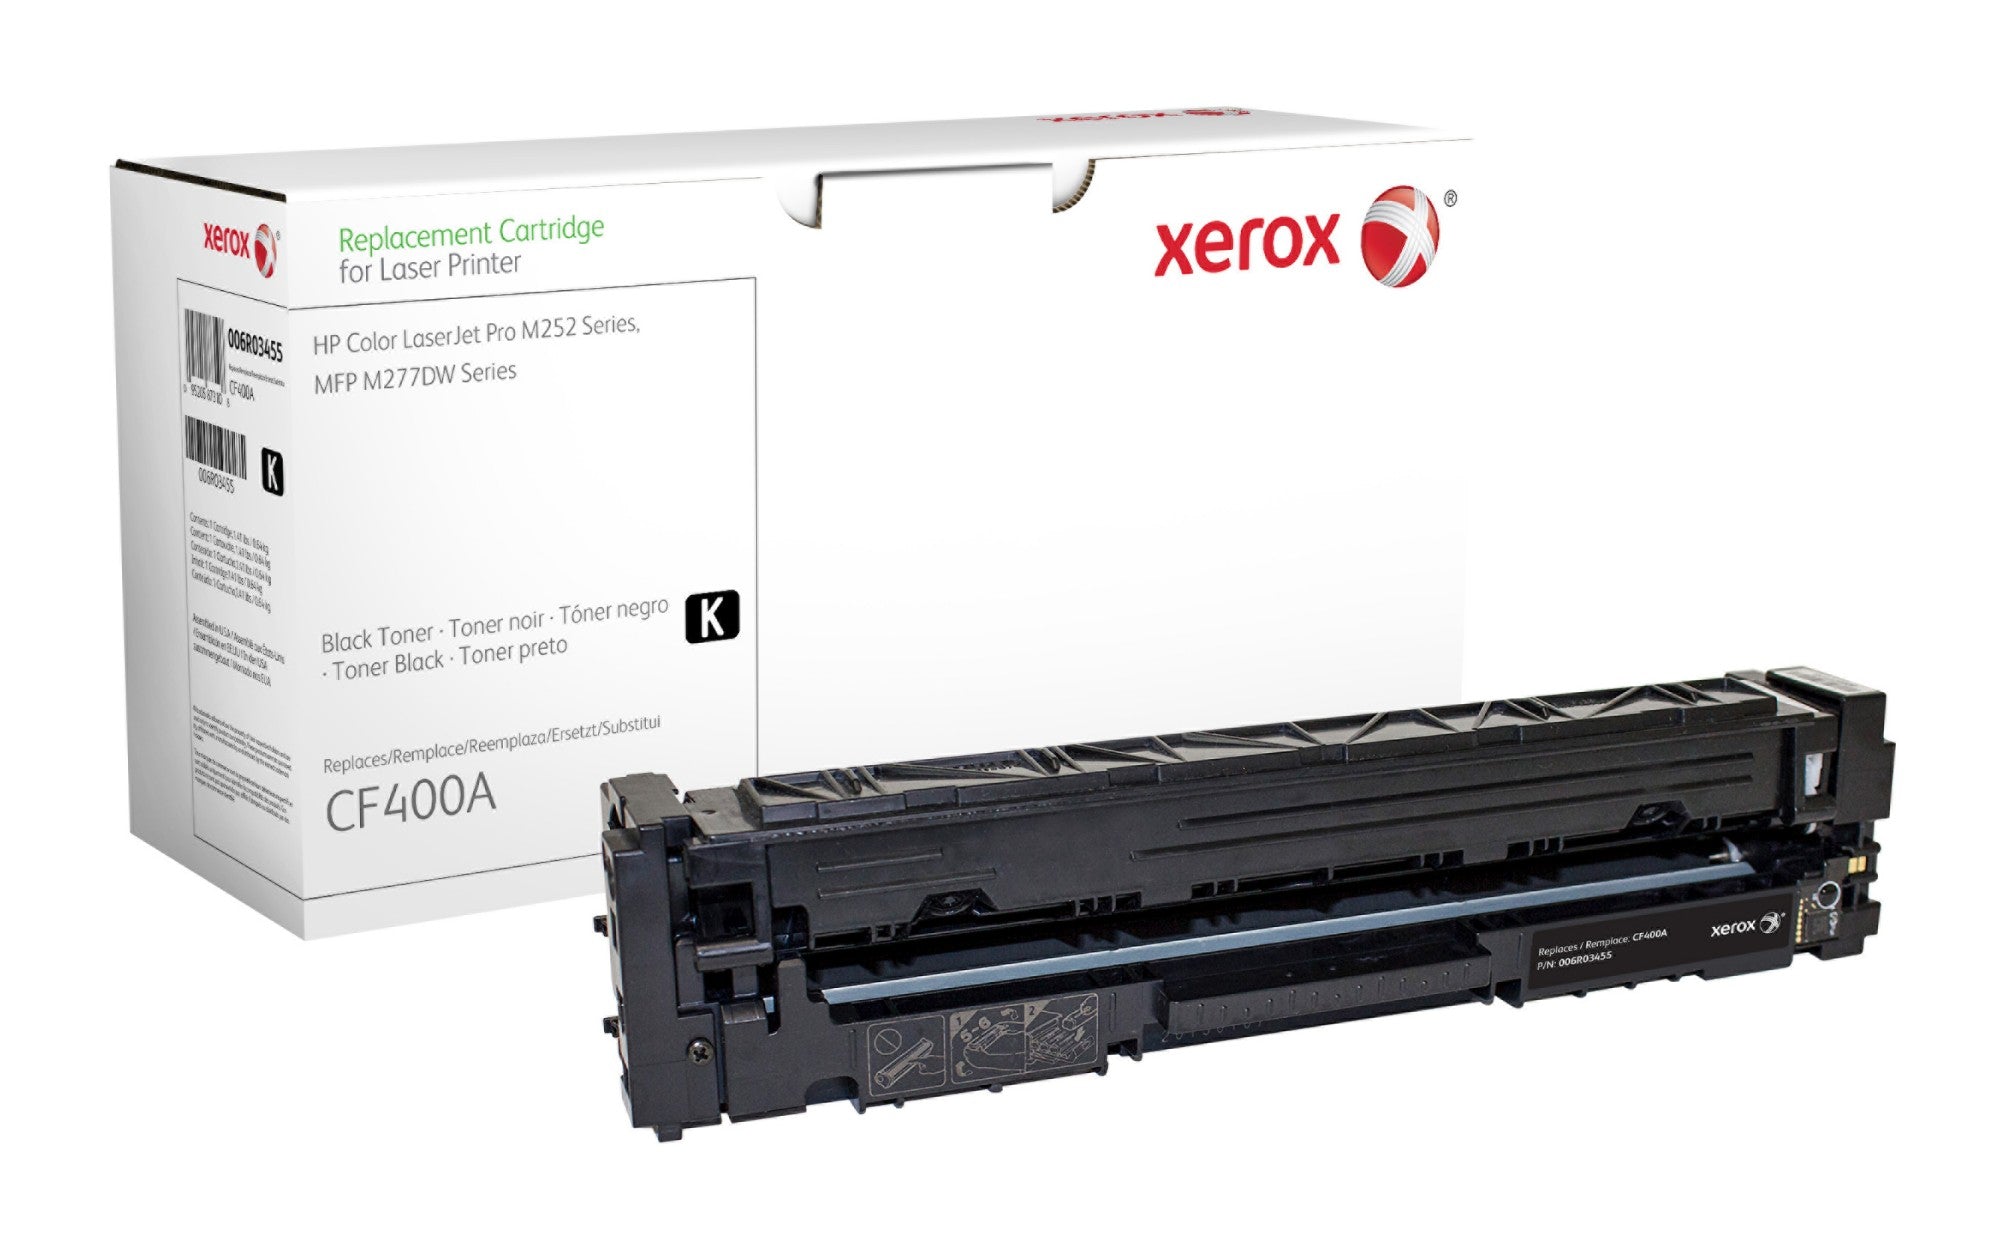 Xerox 006R03455 Toner cartridge black, 1.5K pages (replaces HP 201A/CF400A) for HP Pro M 252